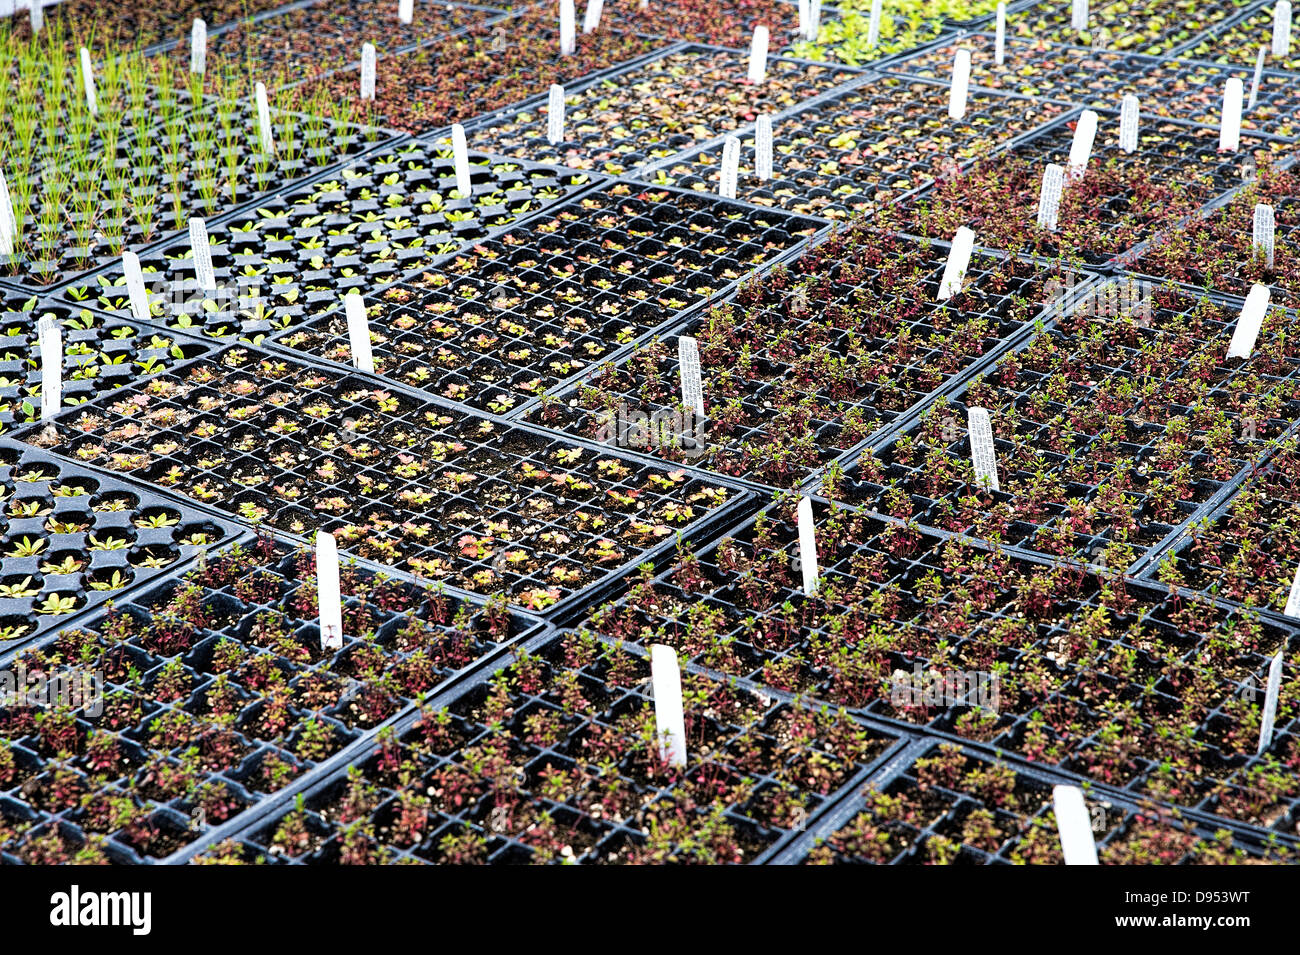 Perennial plants being grown in a wholesale greenhouse. Stock Photo